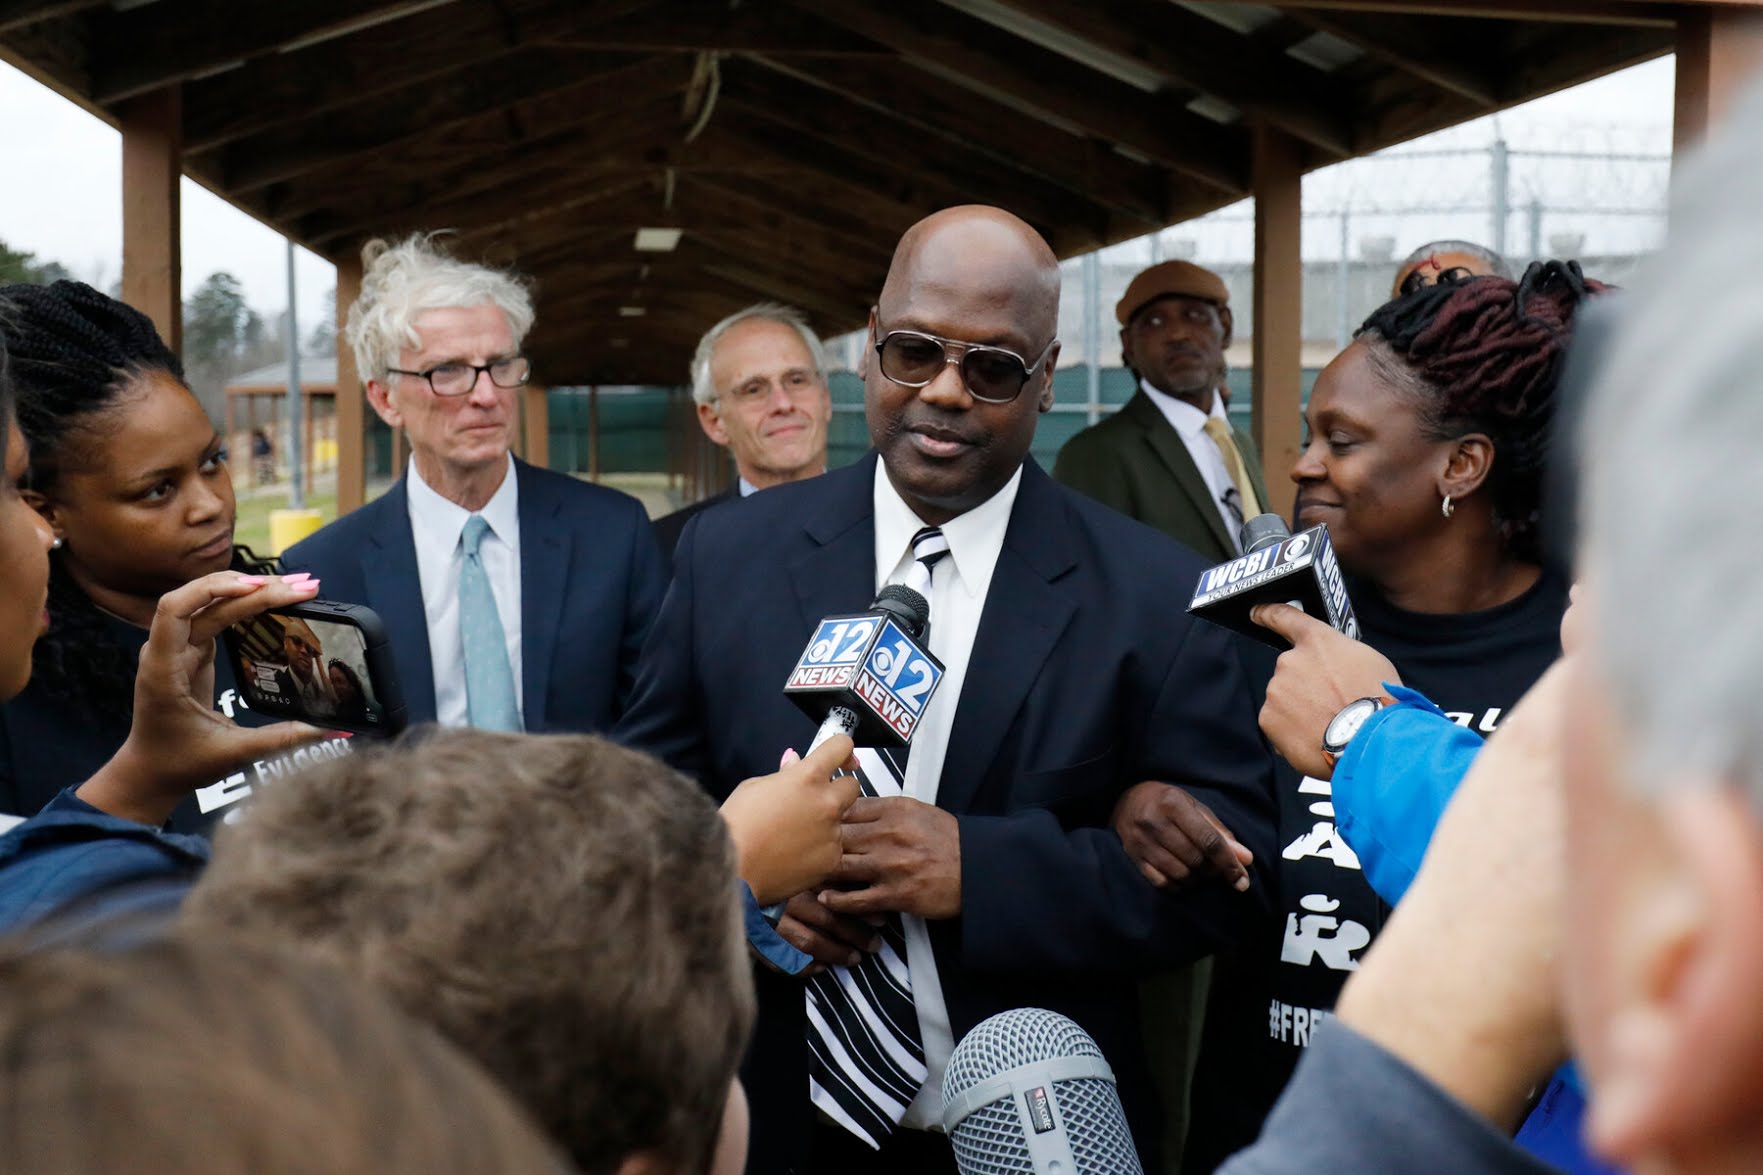 Curtis Flowers, center, as he exited the Winston-Choctaw Regional Correctional Facility in Louisville, Miss., in 2019.